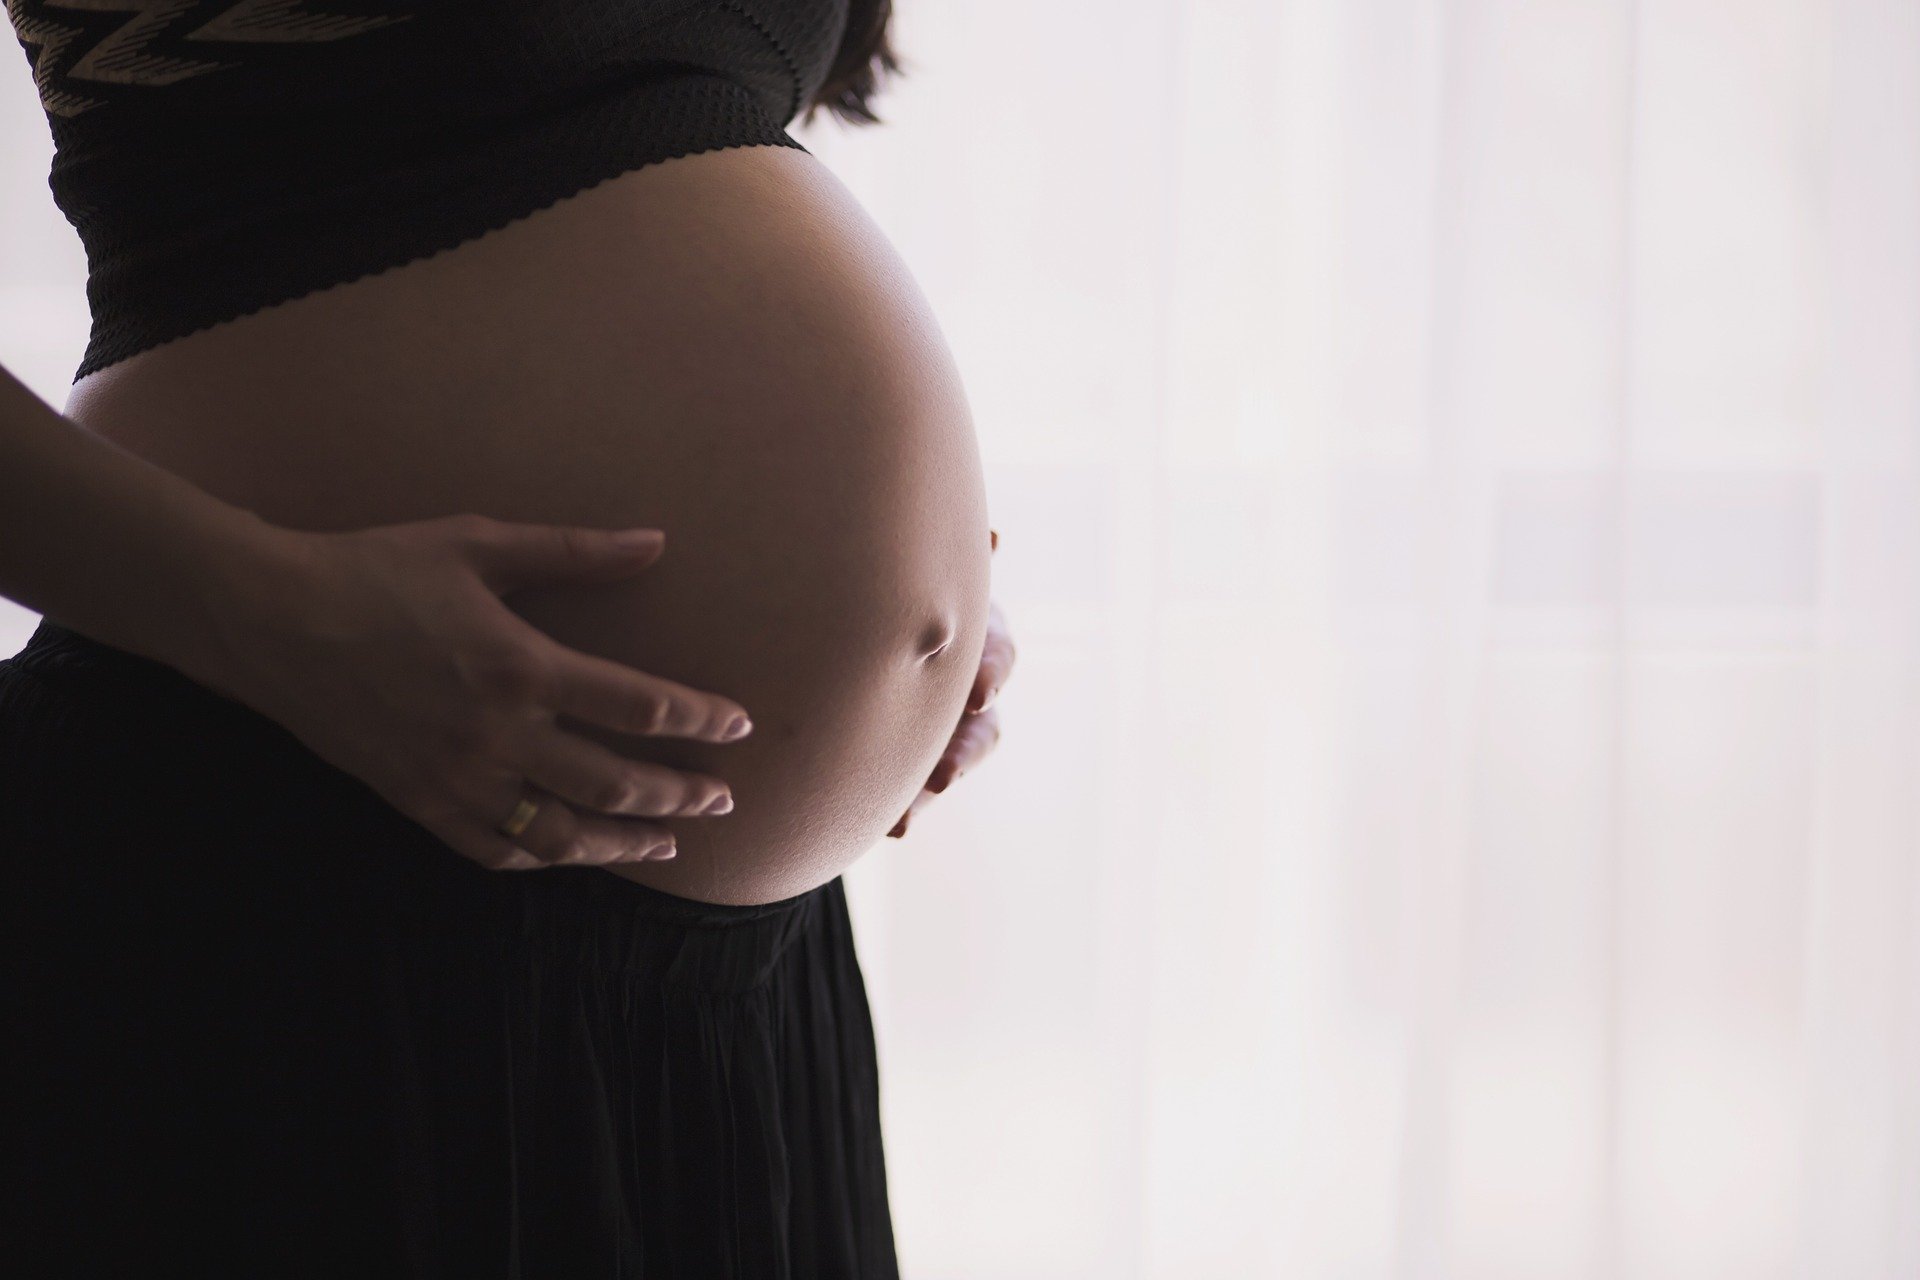 NEWS | PREGNANT? The rules around partners attending scans and labour have changed